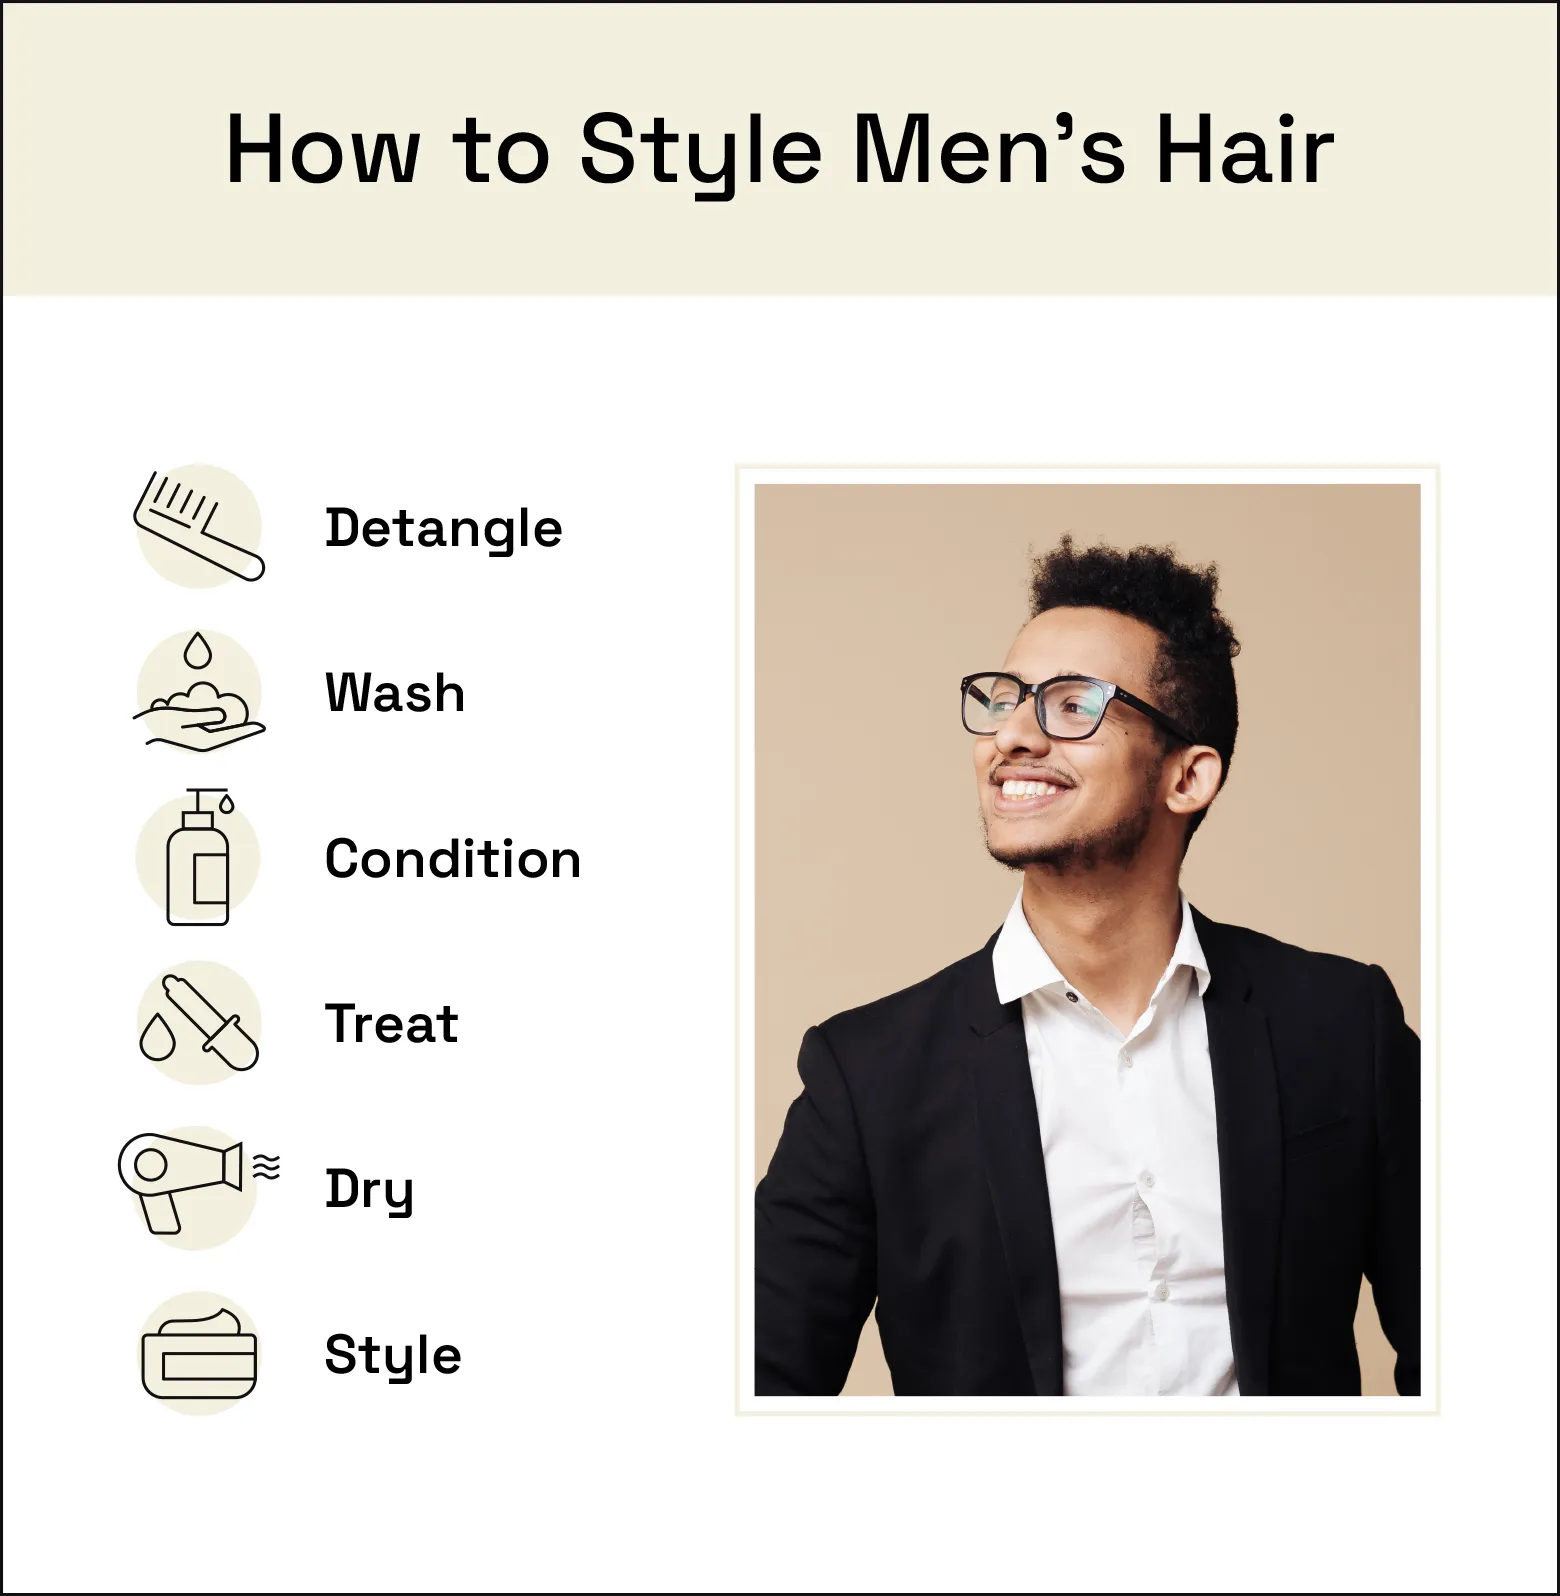 To style men’s hair, detangle it, wash it, condition it, treat it, dry it, and style it.